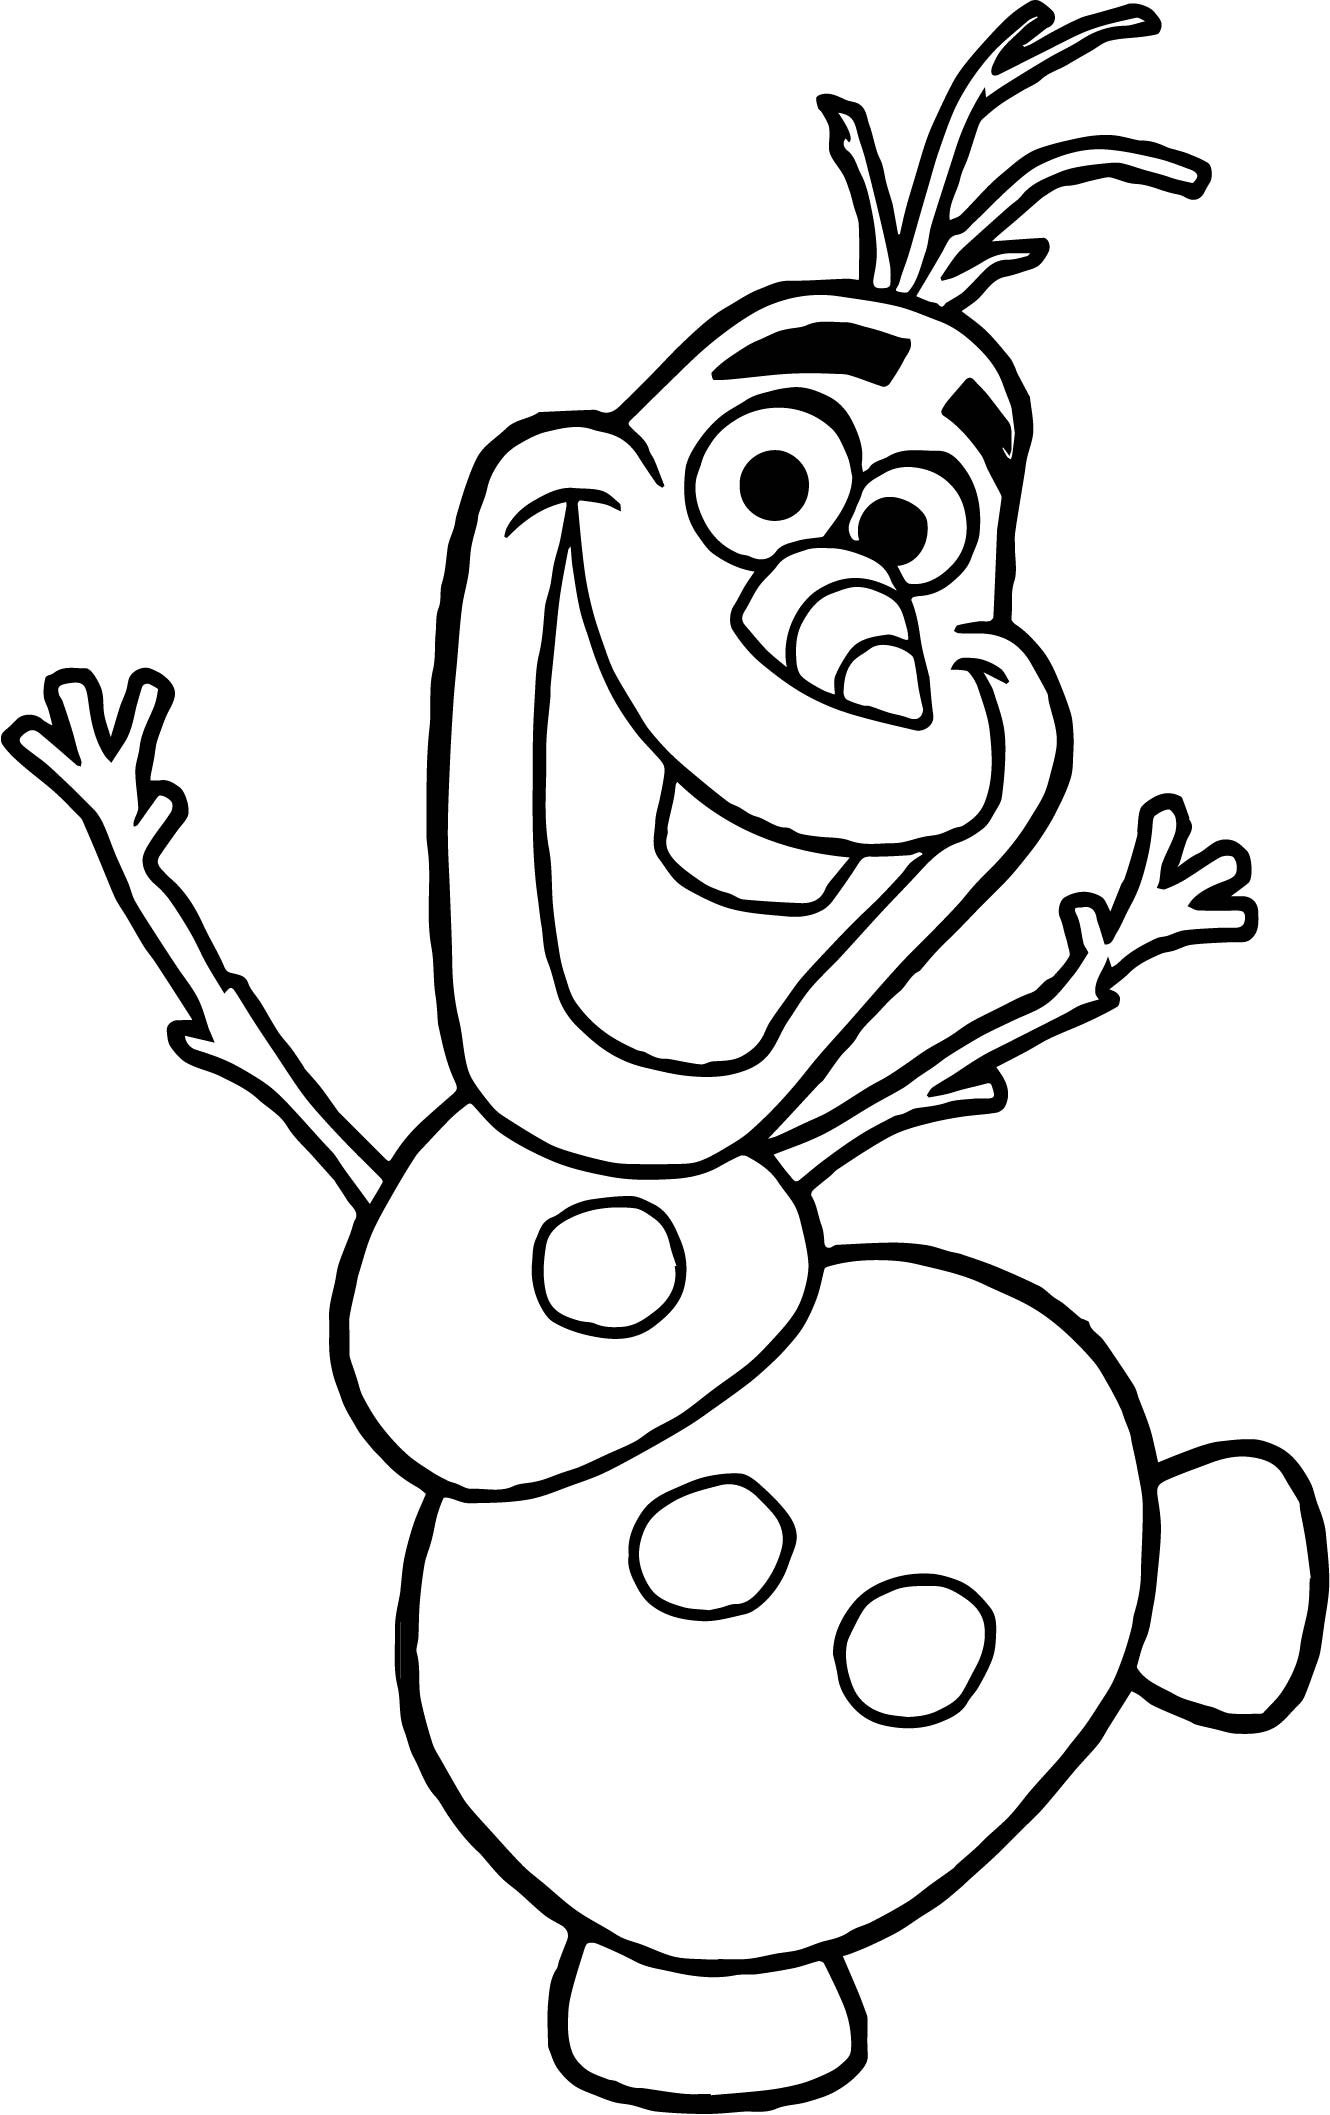 Olaf Printable Coloring Pages
 Olaf Dance Coloring Page